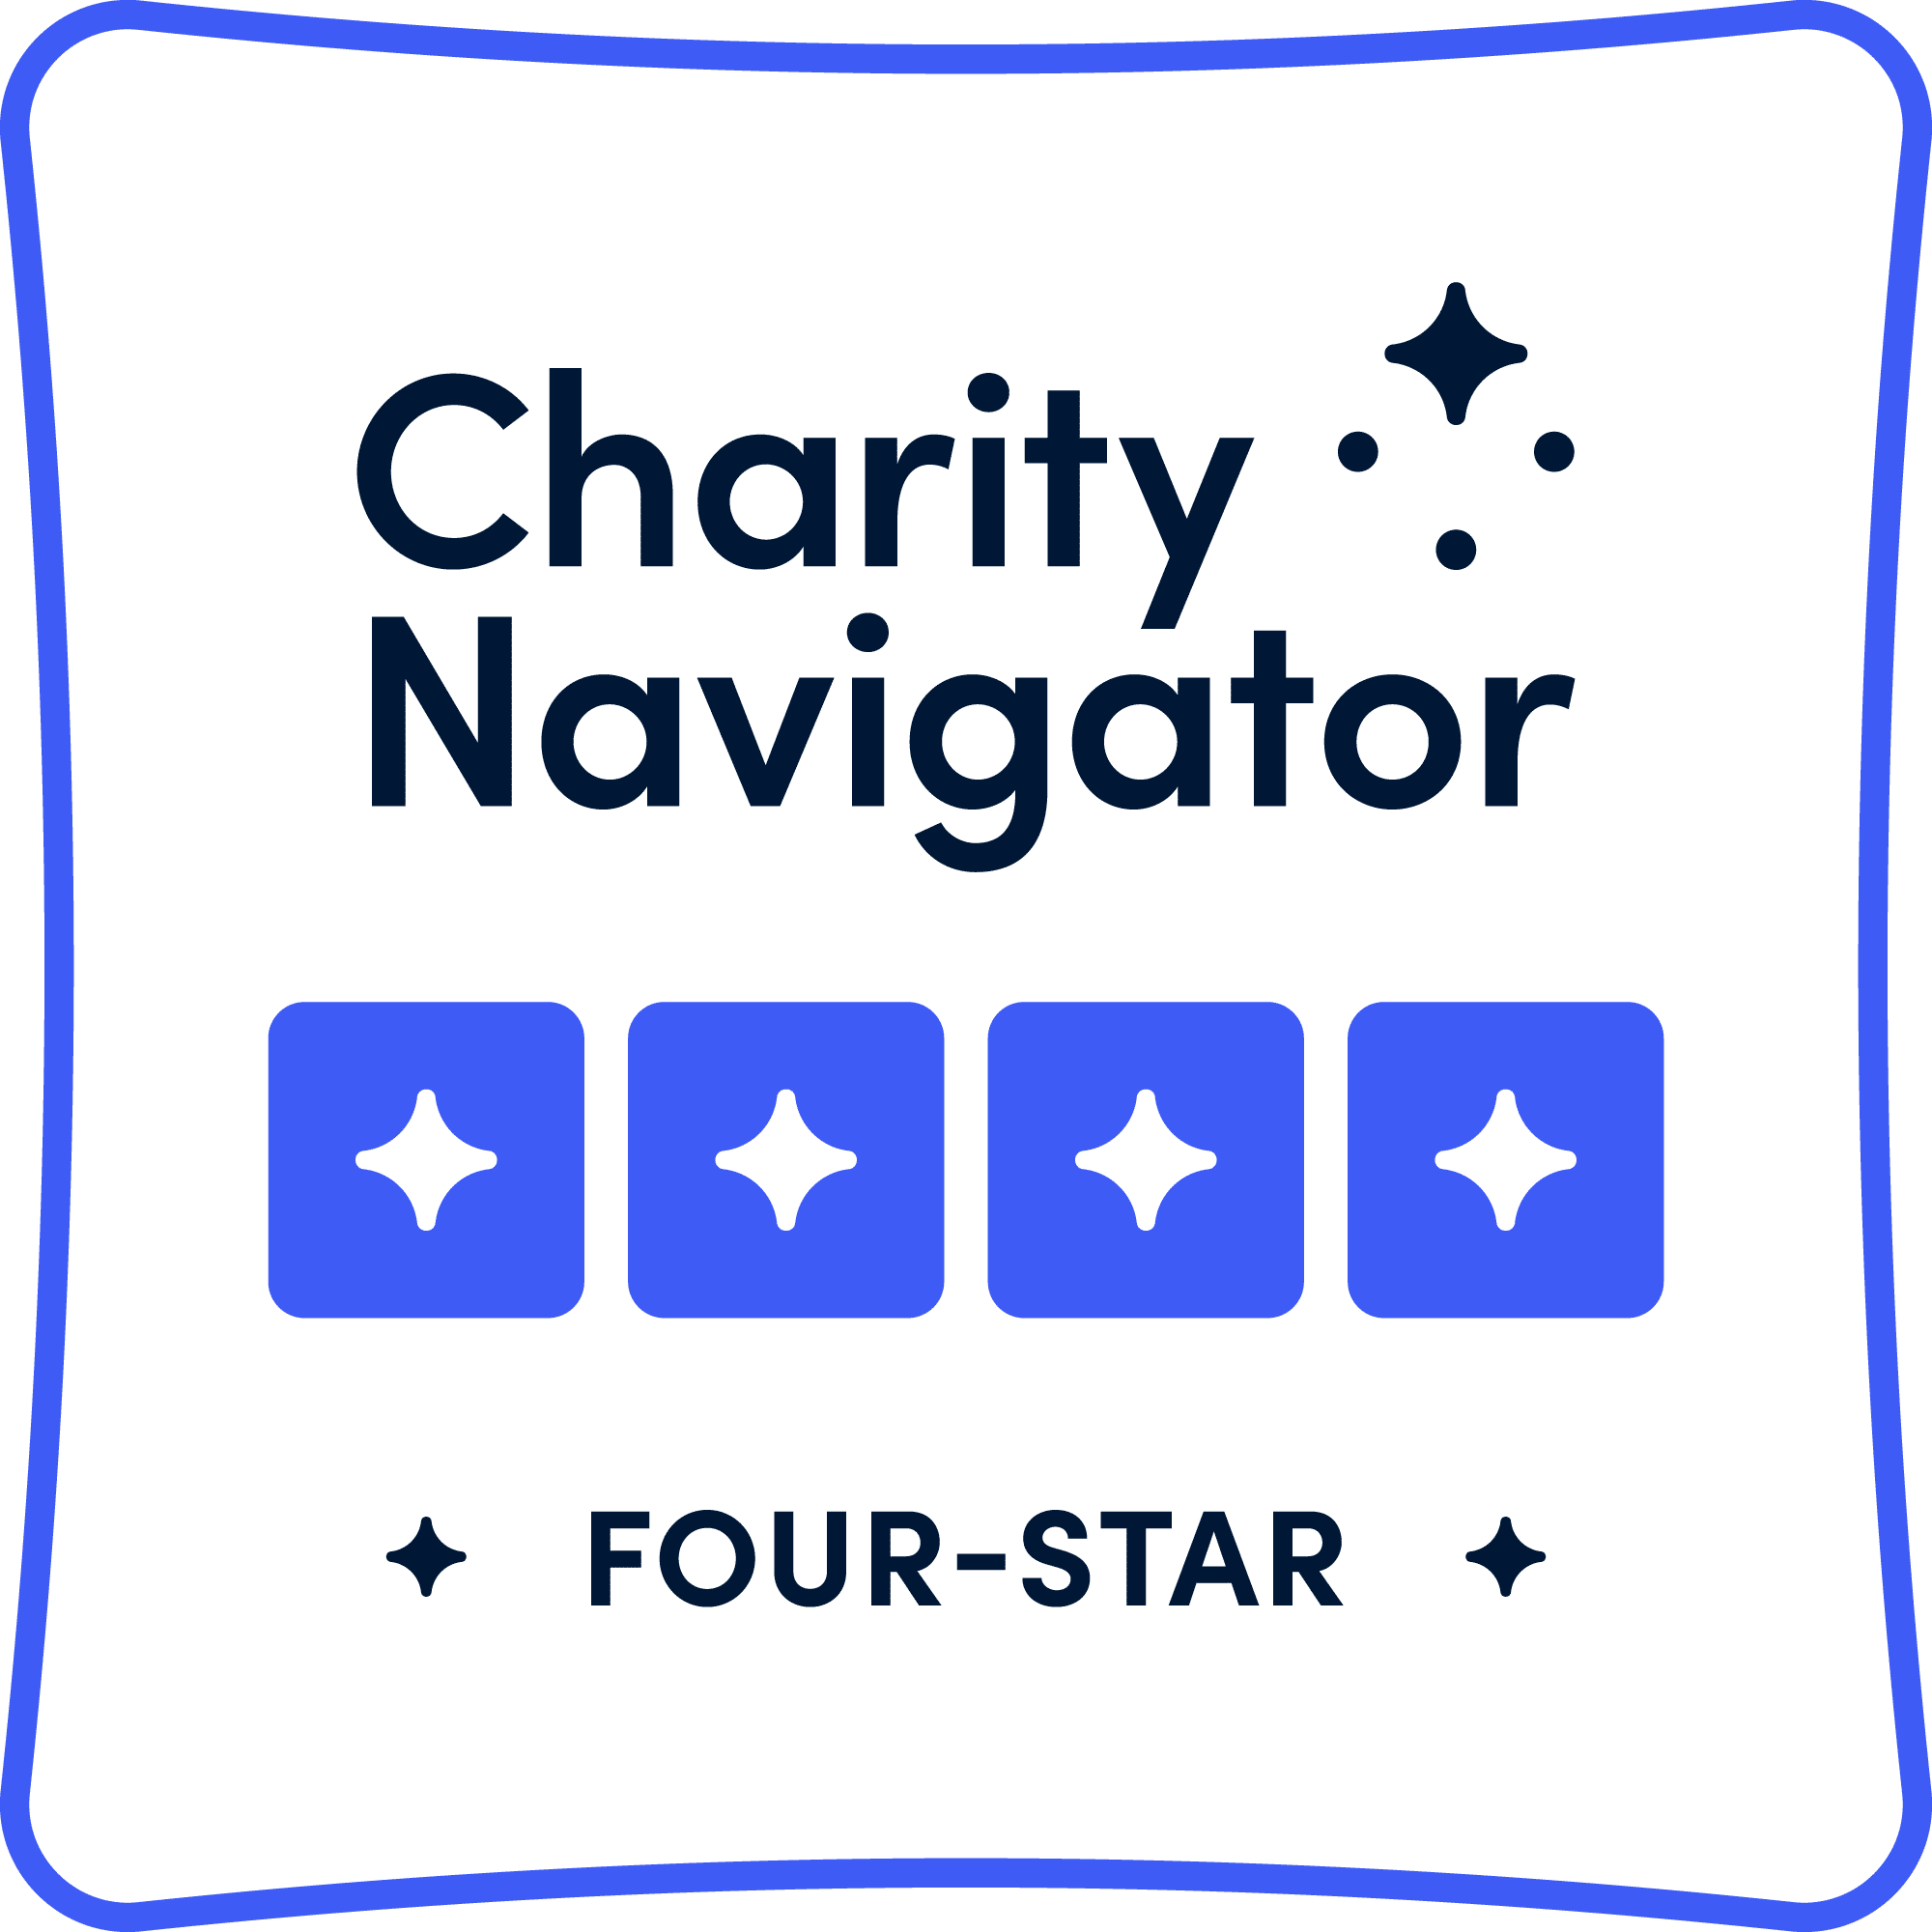 A Better Chance has earned a Four Star Rating from Charity Navigator.